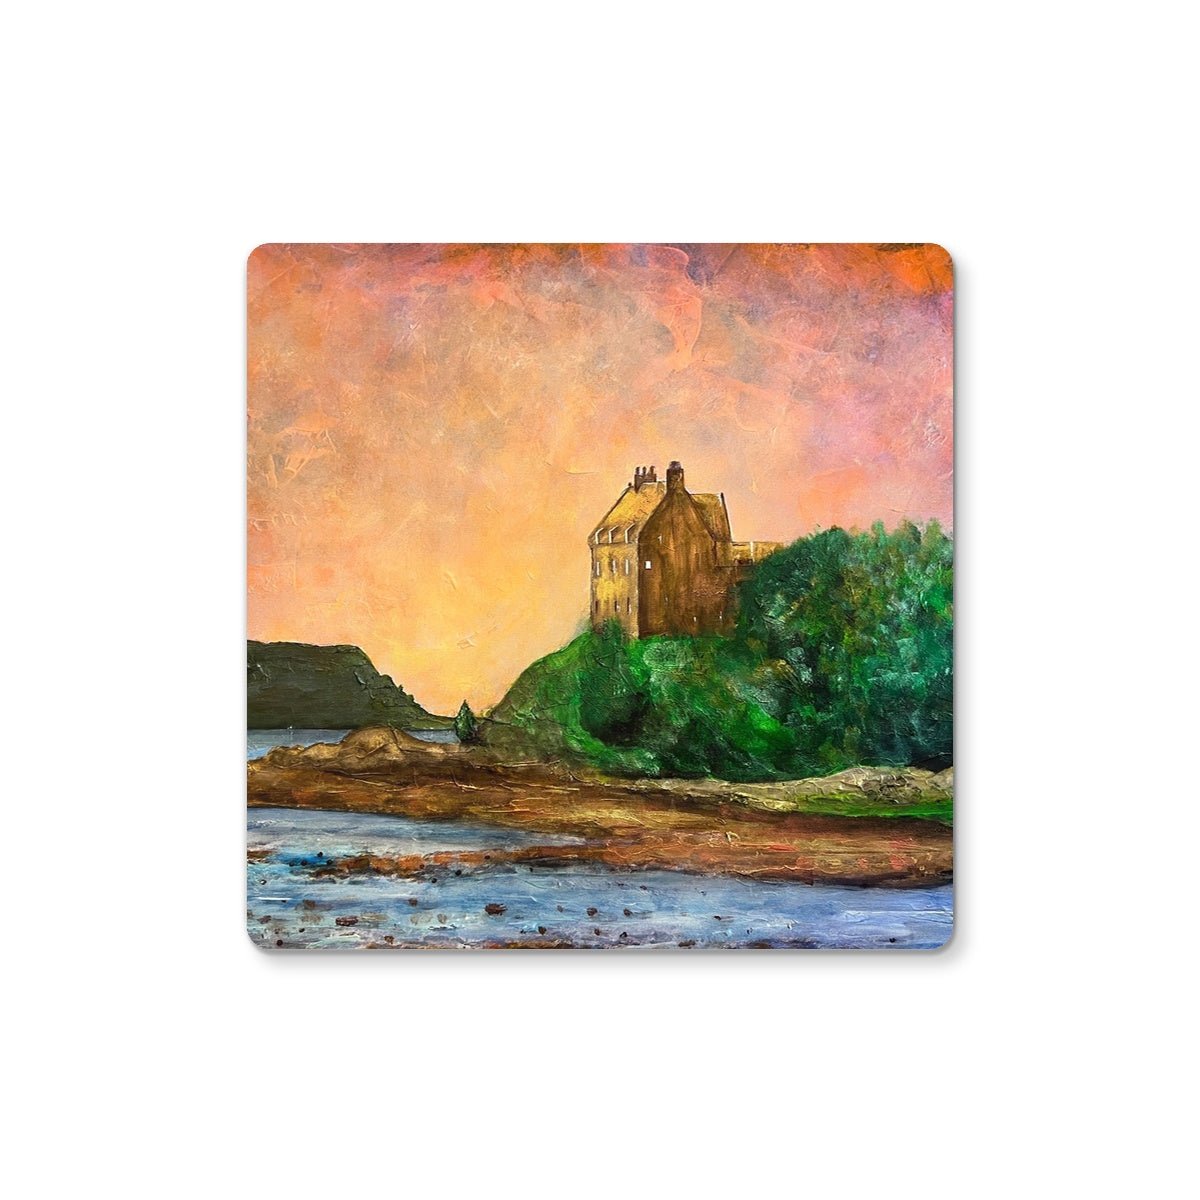 Duntrune Castle Art Gifts Coaster-Coasters-Historic & Iconic Scotland Art Gallery-2 Coasters-Paintings, Prints, Homeware, Art Gifts From Scotland By Scottish Artist Kevin Hunter